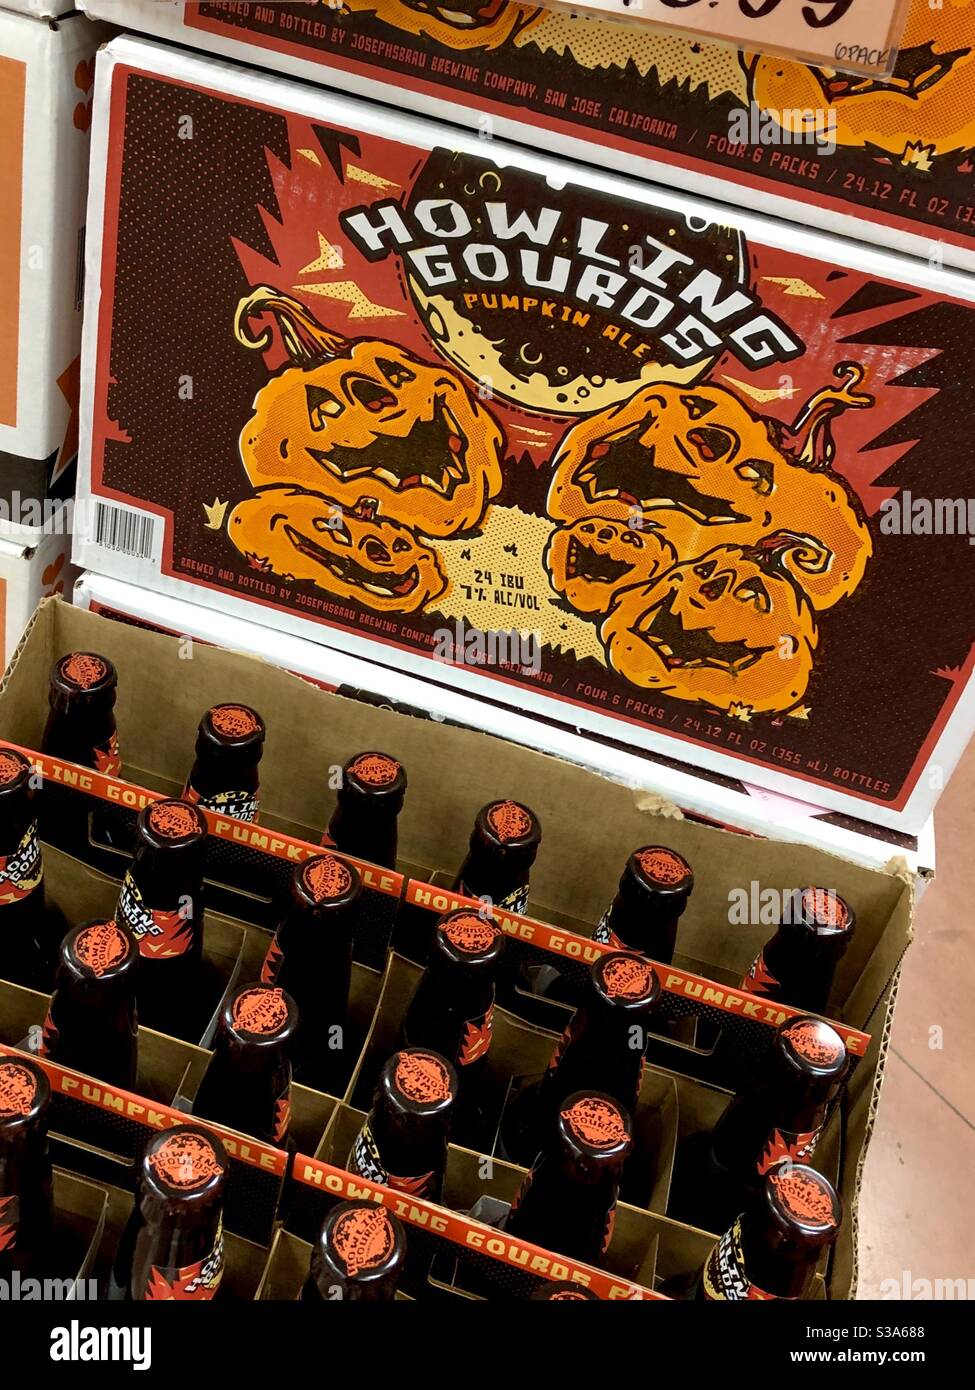 Howling Gourds Pumpkin Ale display in supermarket at Halloween time. Stock Photo